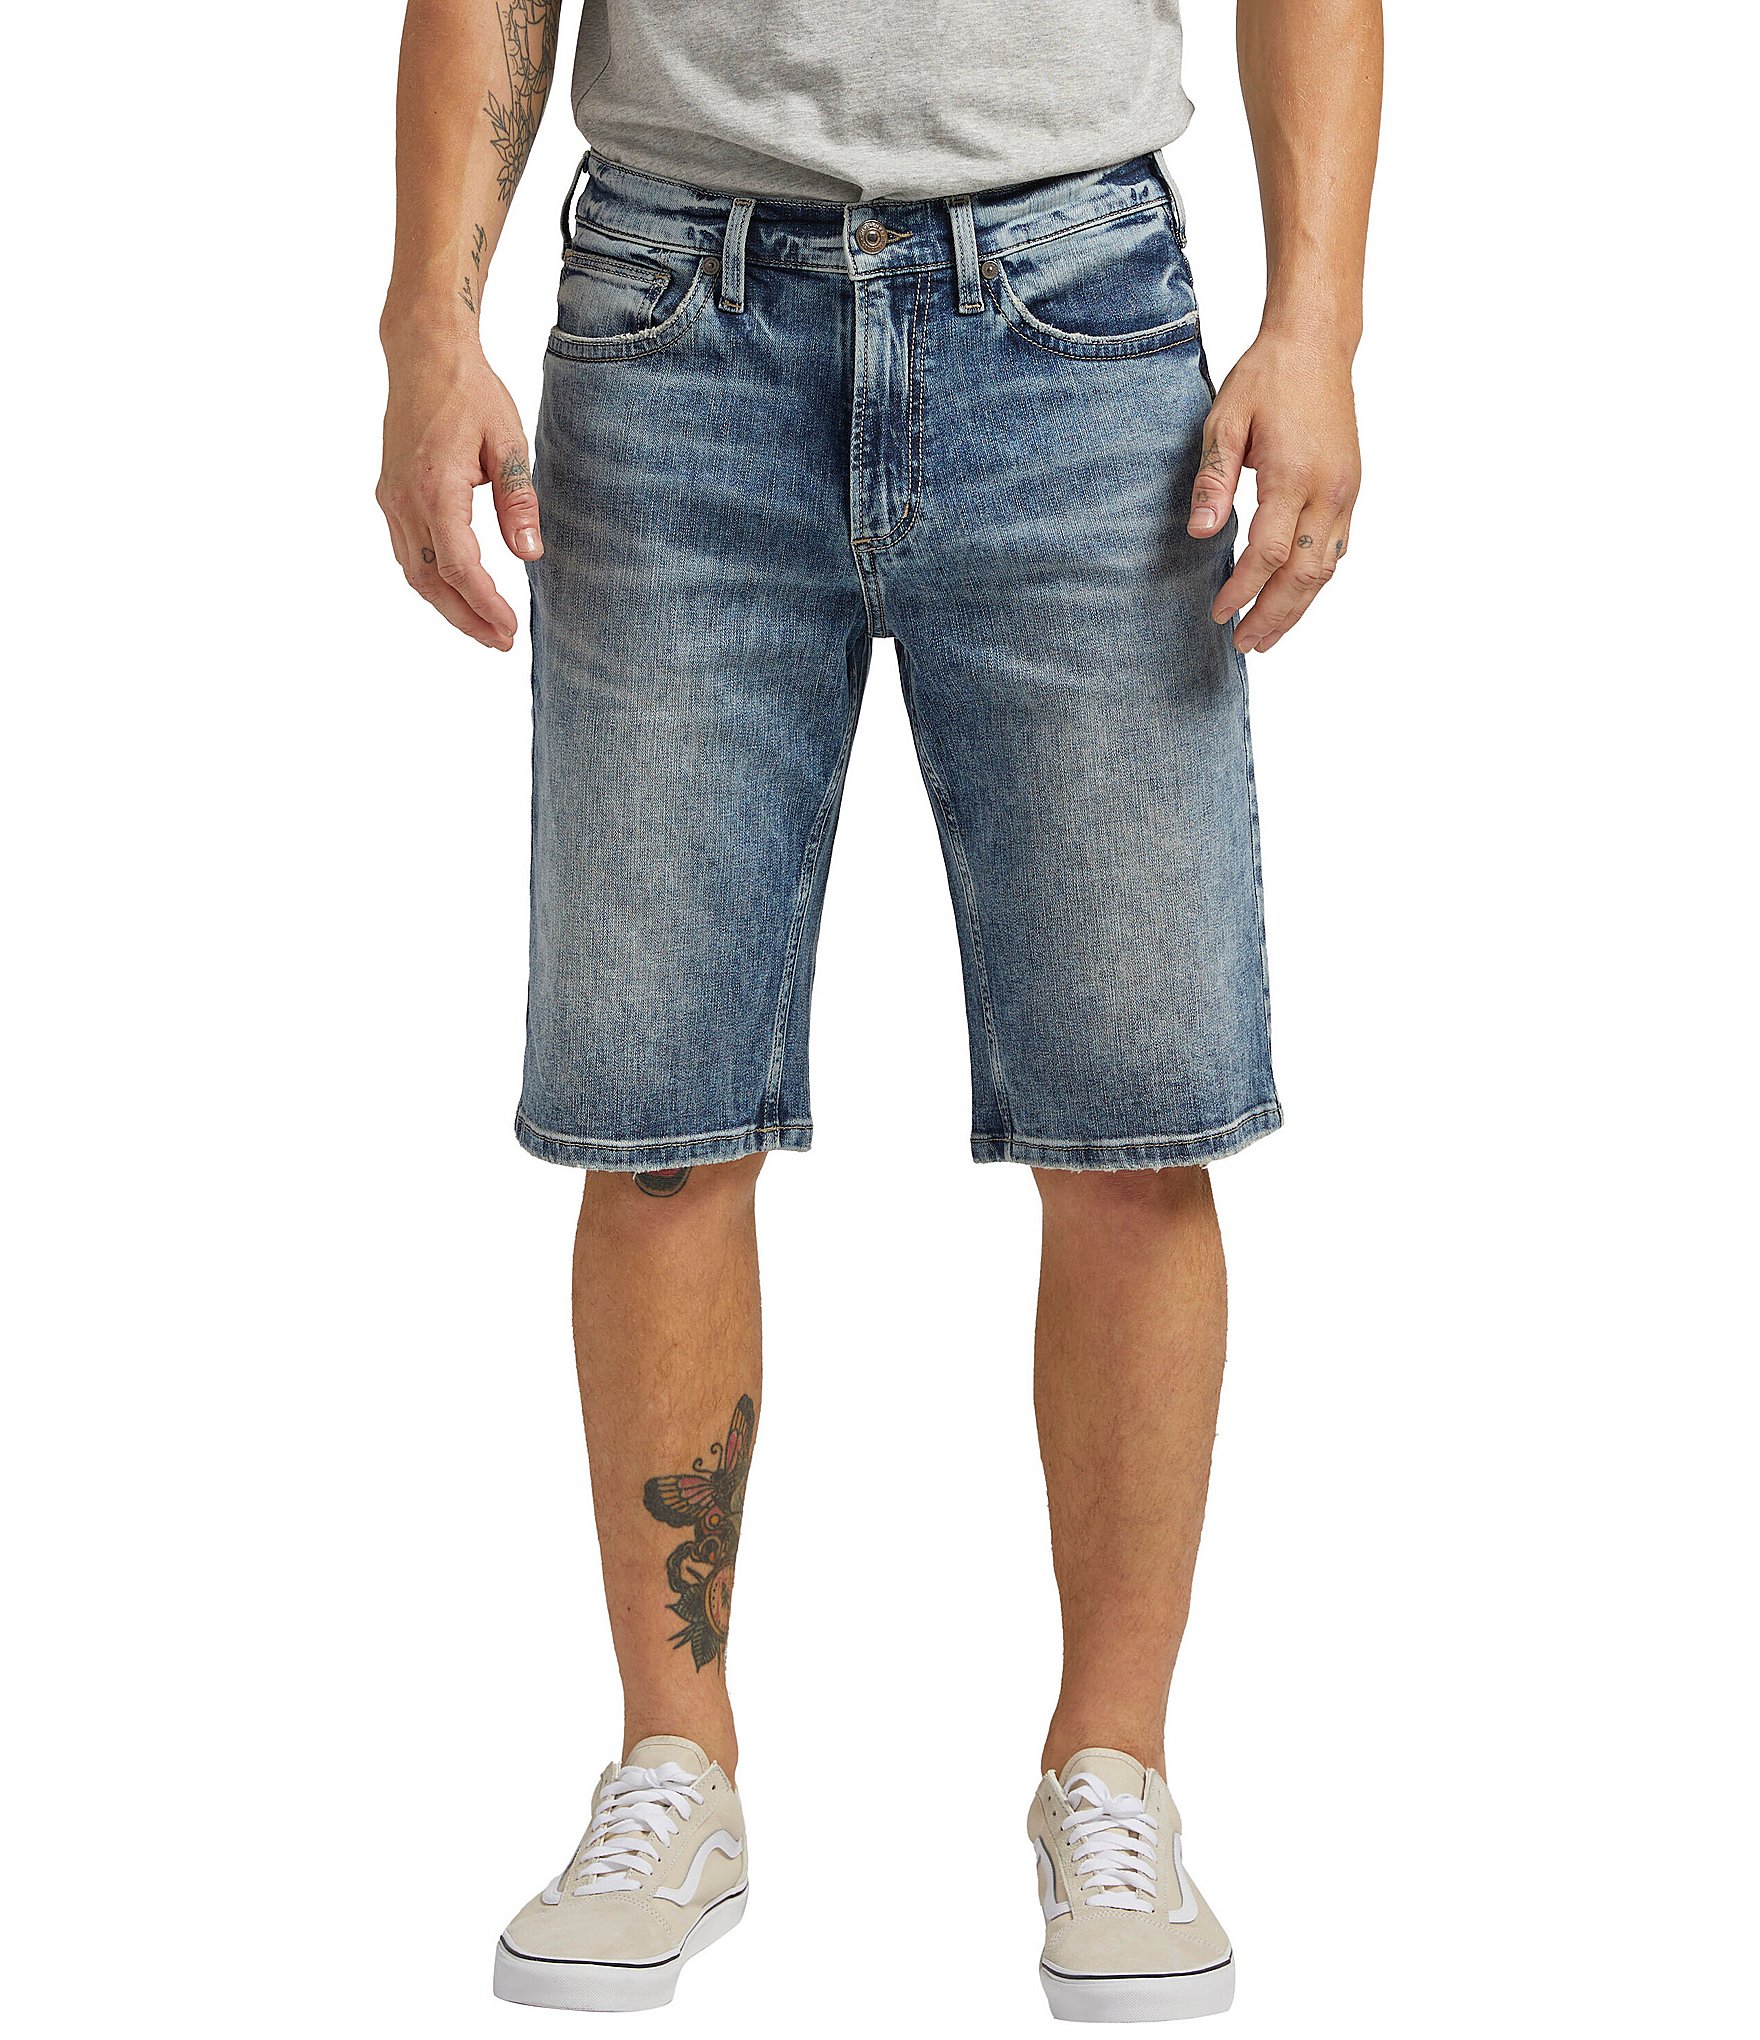 Silver Jeans Co. Gordie Relaxed Fit MID FLEX Medium Wash 13 Inseam Shorts